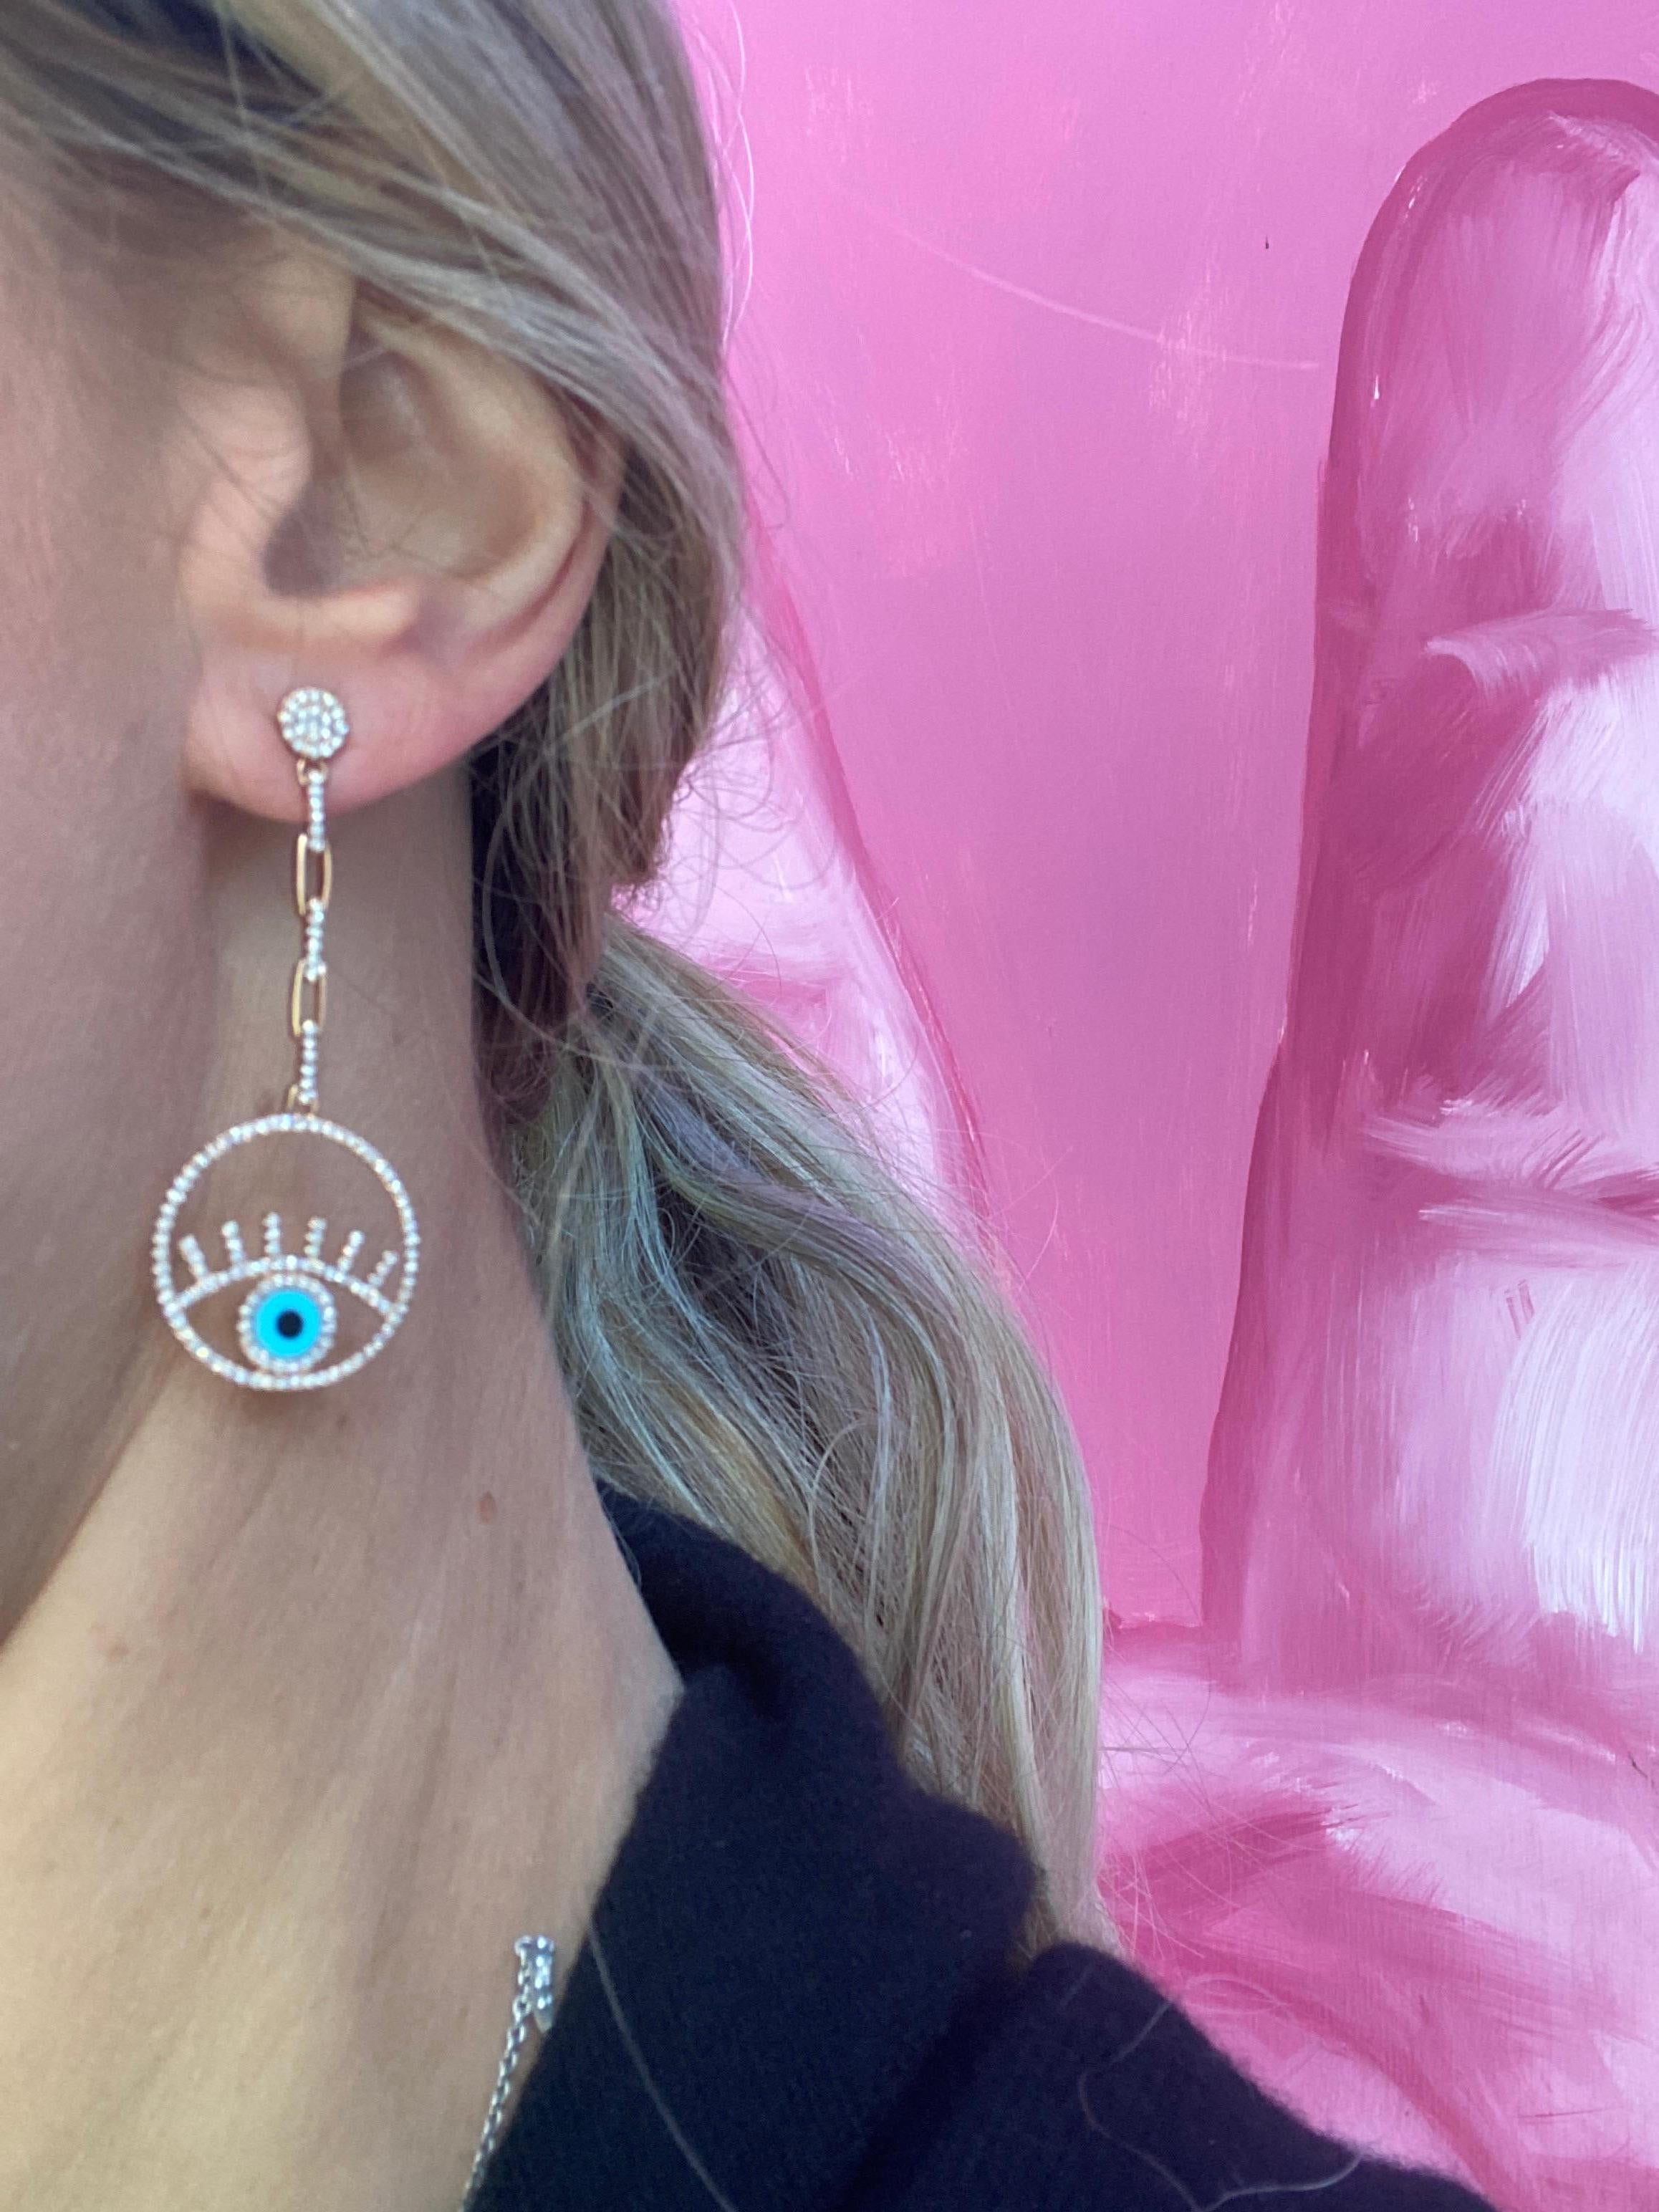 Protect yourself by wearing these 14 karat rose gold evil eye drop earrings featuring 0.89 carat total weight in round diamonds and onyx and turquoise accents as the eye. Butterfly back. These are approximately 2